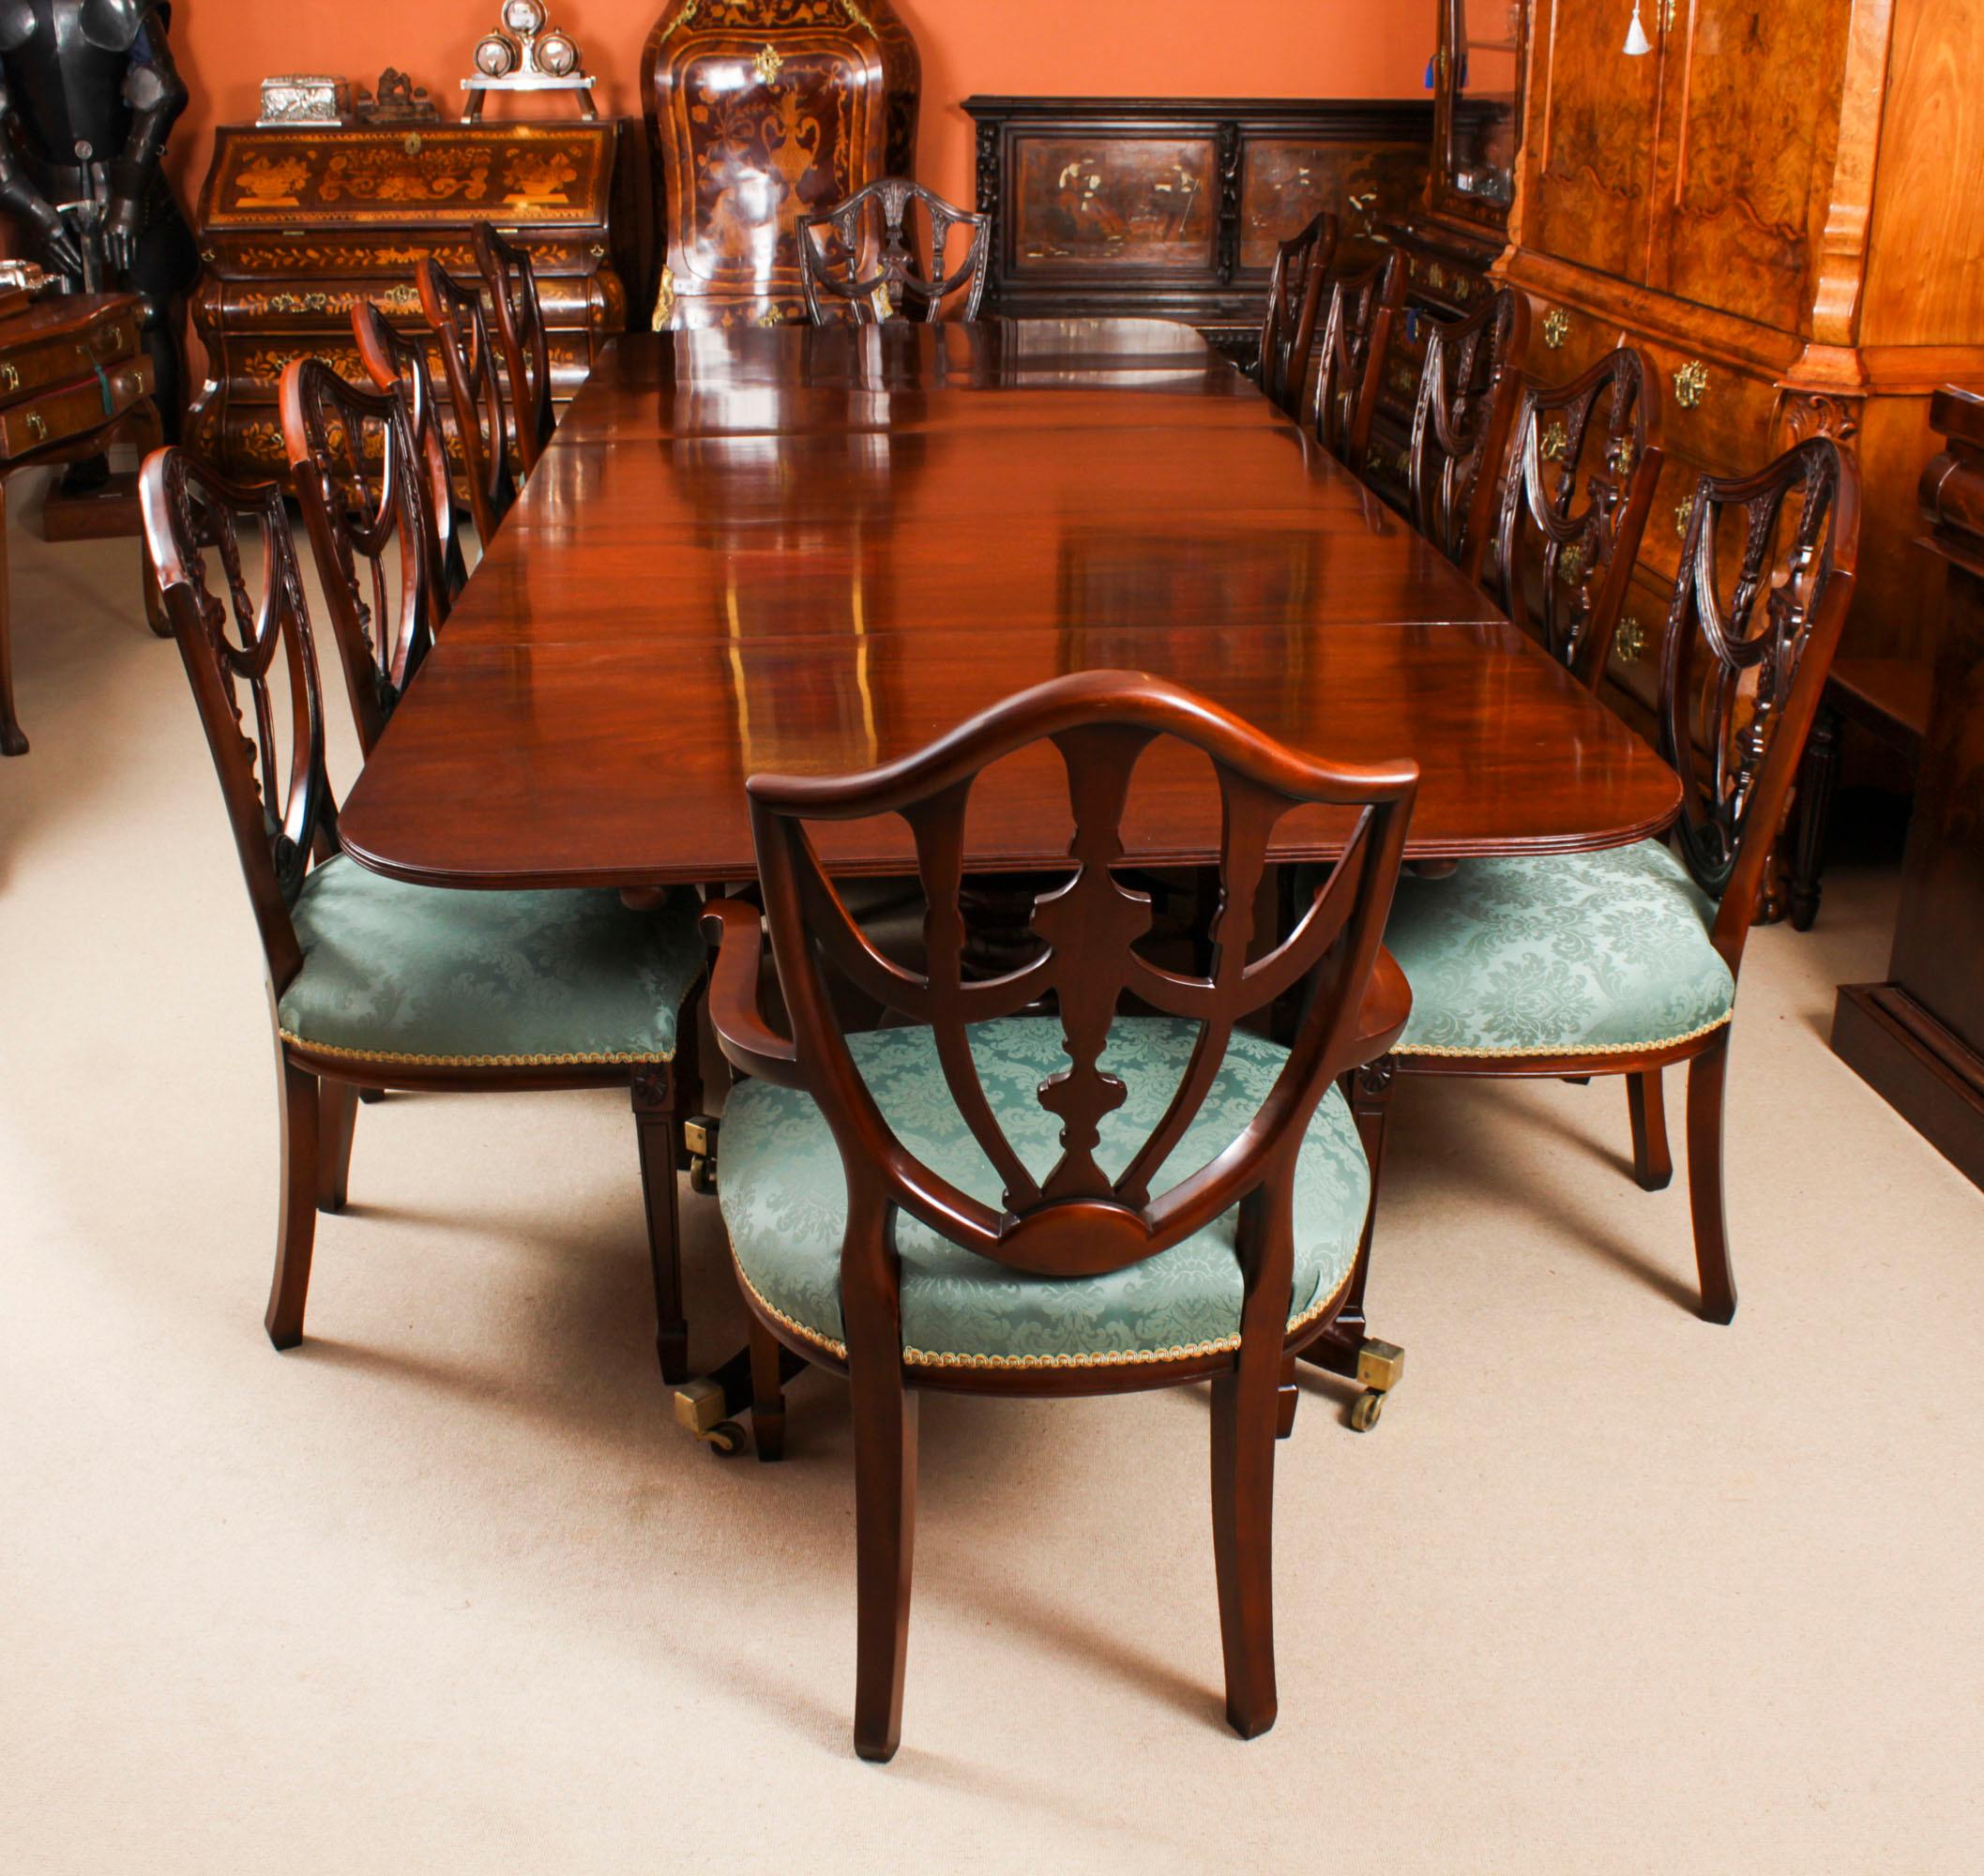 Antique 12ft inch Regency Mahogany Triple Pillar Dining Table c1830 19th C In Good Condition For Sale In London, GB